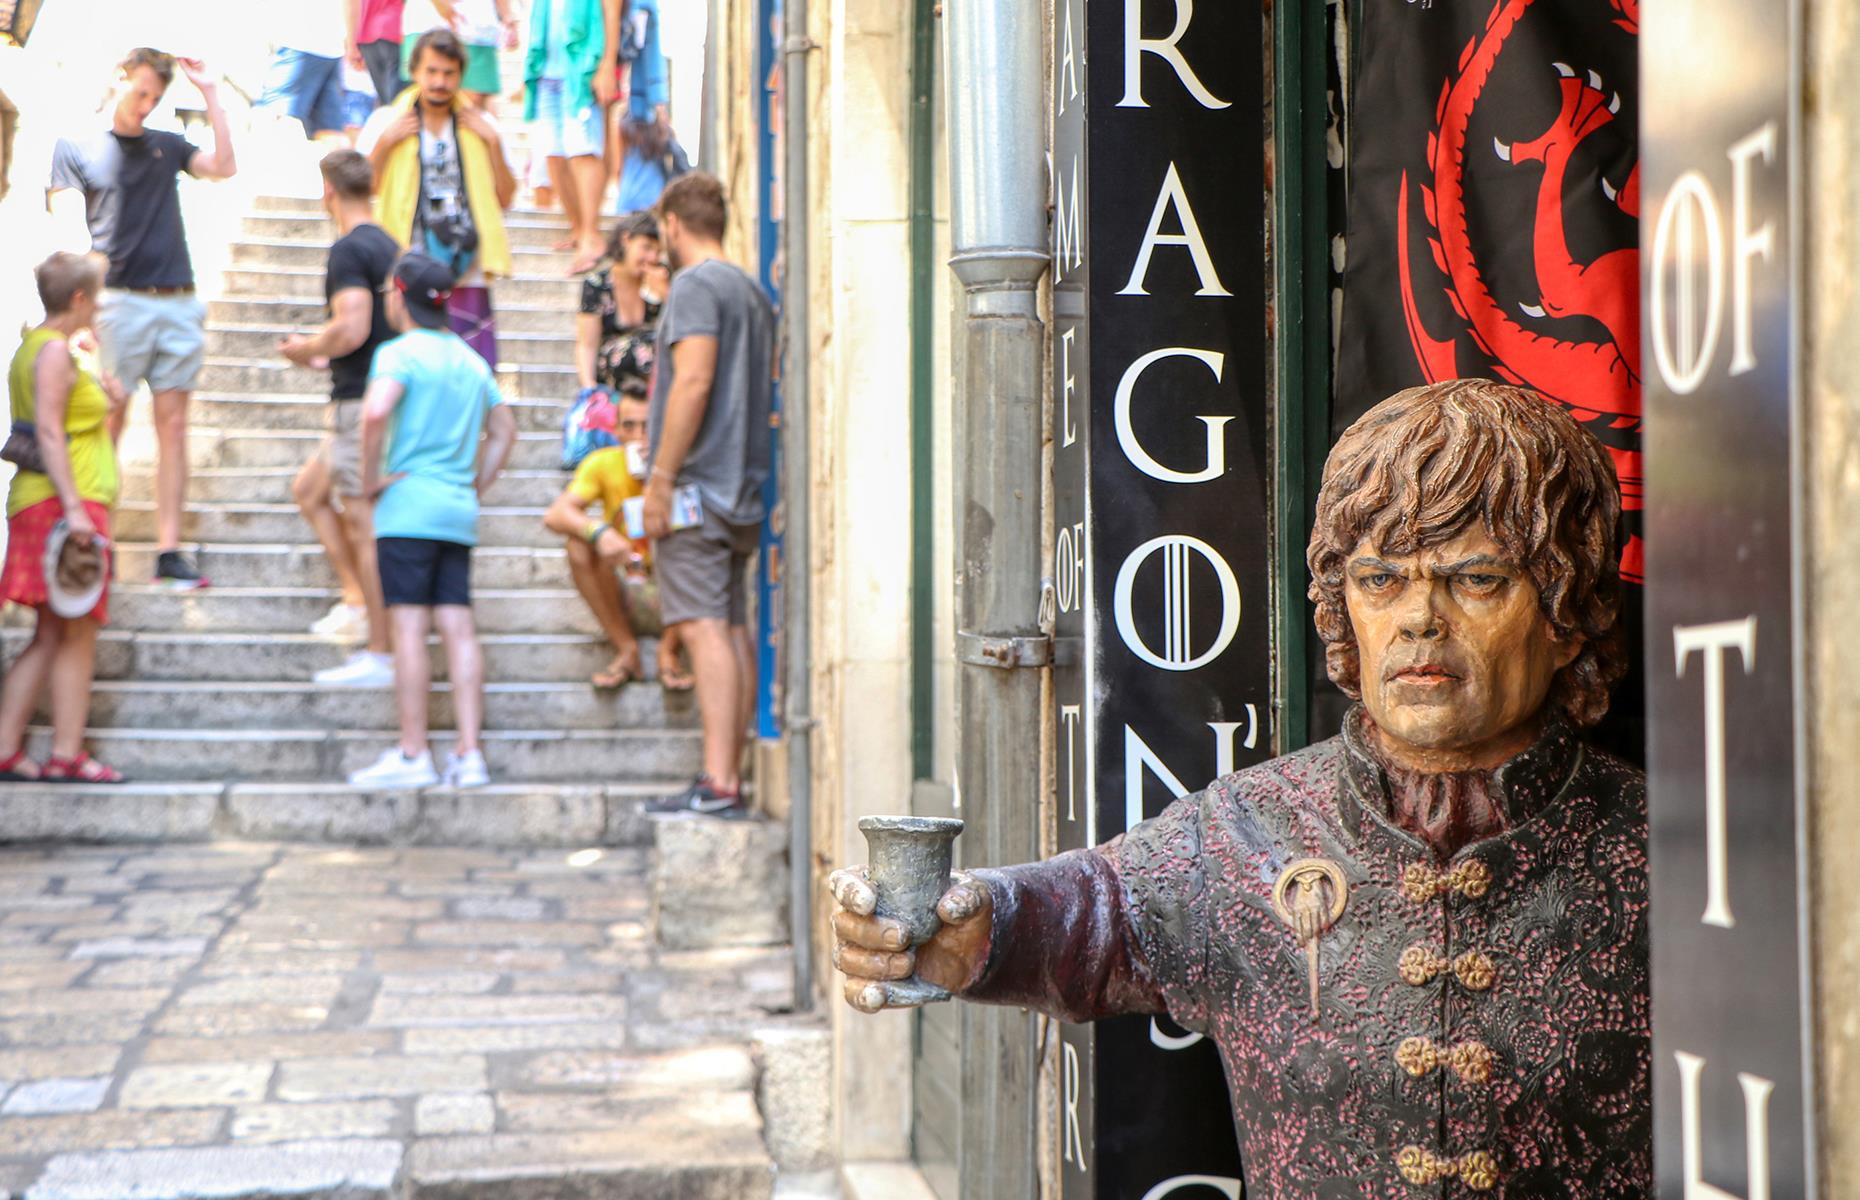 <p>With its majestic palaces, Baroque churches and pedestrianized cobbled streets, Dubrovnik’s UNESCO-listed walled old town will seem instantly familiar to anyone who’s seen <em>Game of Thrones</em>, because it doubled for the sunny King's Landing<em>.</em> A <em><a href="https://www.kingslandingdubrovnik.com/game-of-thrones-tours">Game of Thrones </a></em><a href="https://www.kingslandingdubrovnik.com/game-of-thrones-tours">Walking Tour</a> (with optional boat trip add-on) is a guaranteed hit, transporting your TV-obsessed teens to the locations used in the series, from formidable fortresses to the city walls. Avoid the crowds by visiting in late autumn or early spring. </p>  <p><a href="https://www.loveexploring.com/galleries/164656/this-incredible-country-has-the-most-unesco-world-heritage-sites"><strong>This incredible country has the most UNESCO World Heritage Sites</strong></a></p>